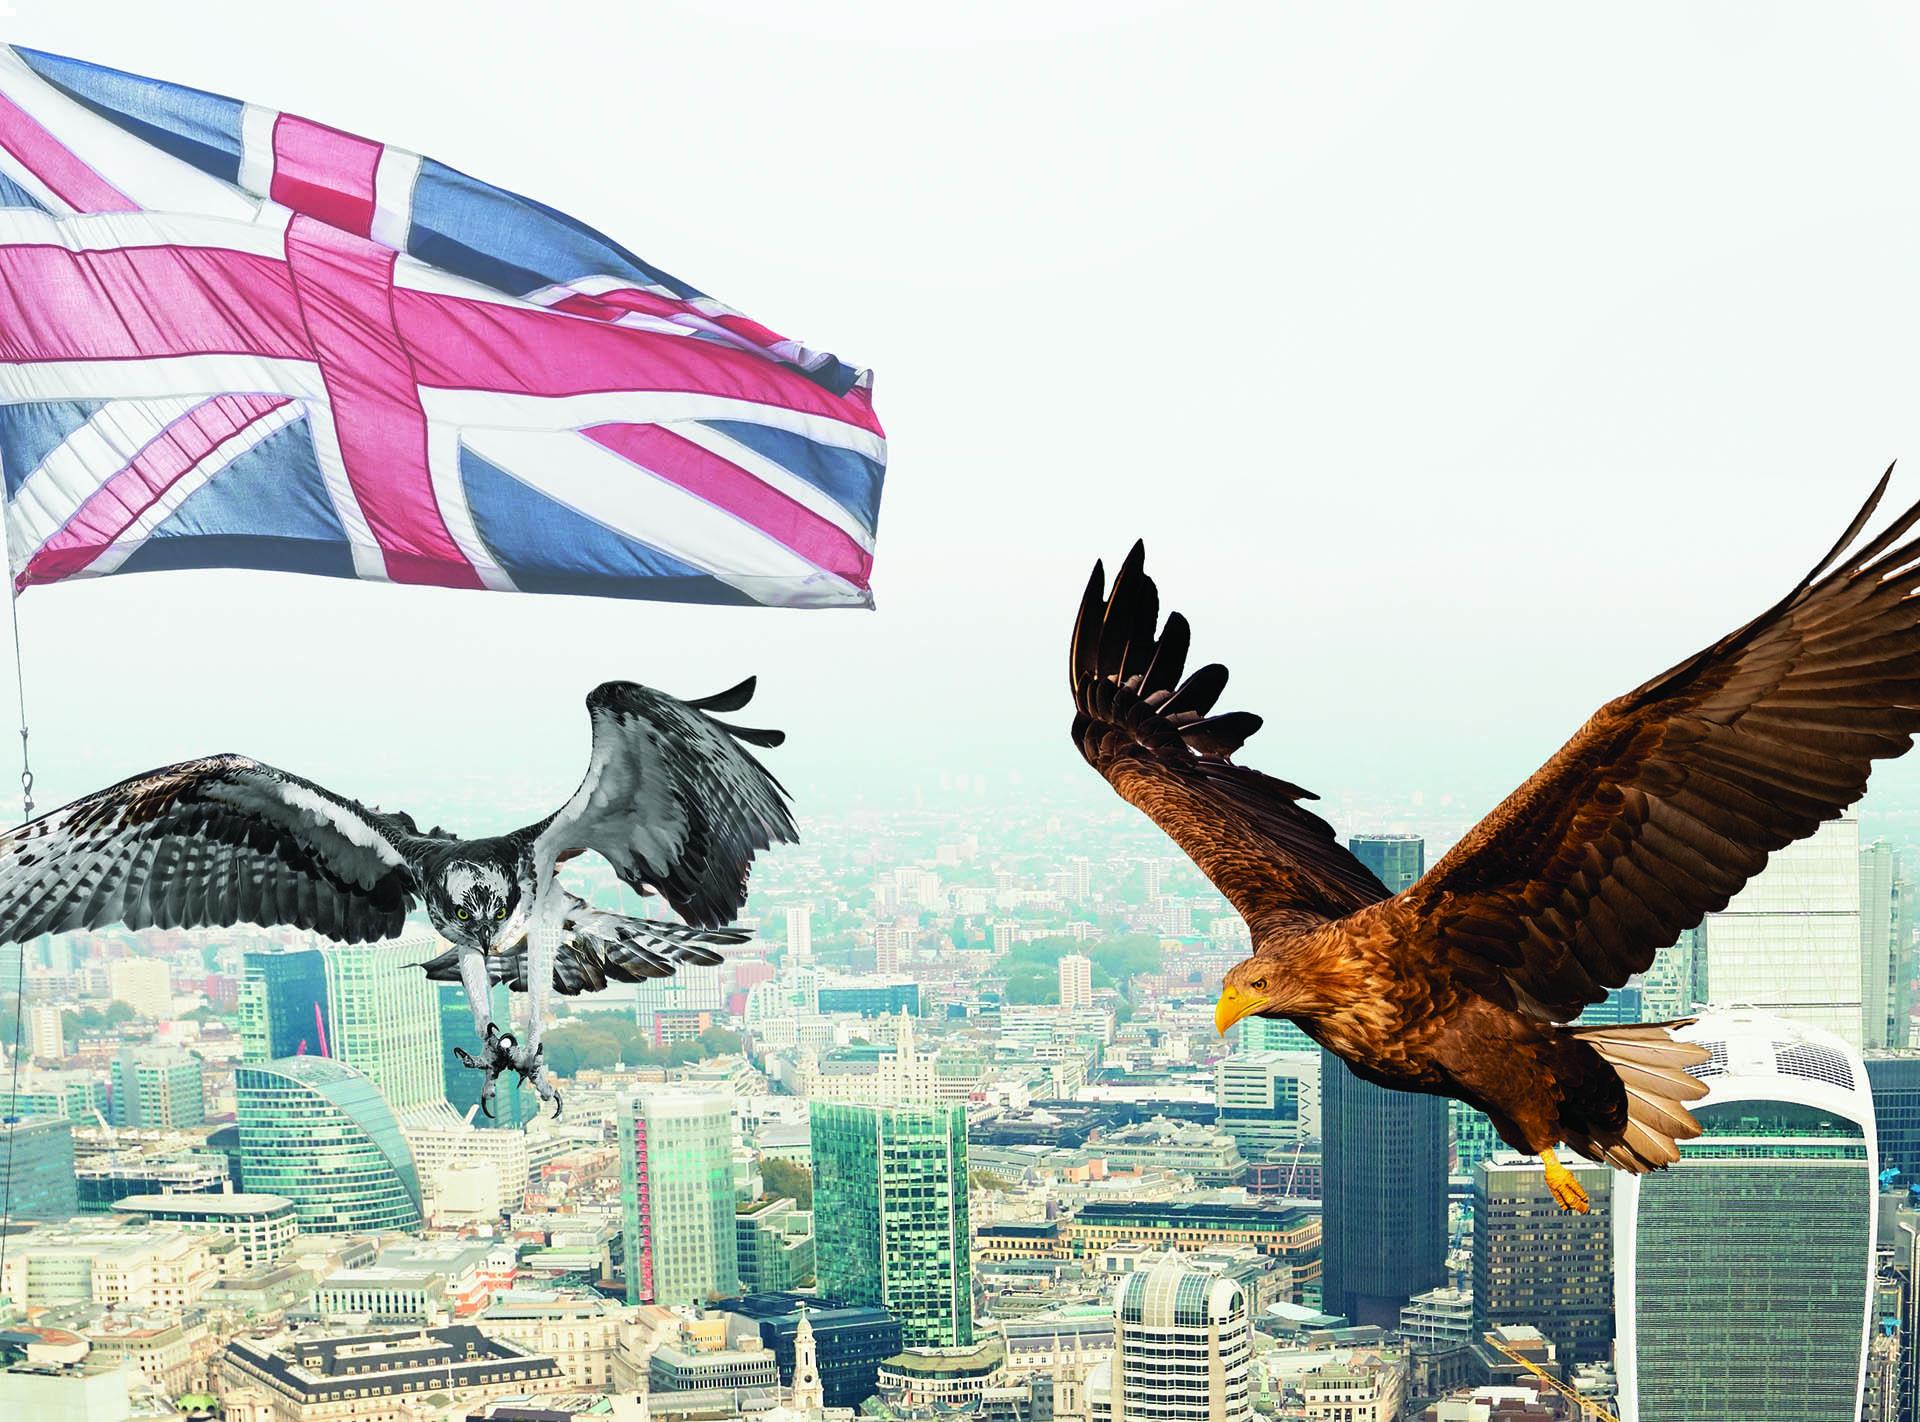 Foreign investors and buyers swooping on UK business assets